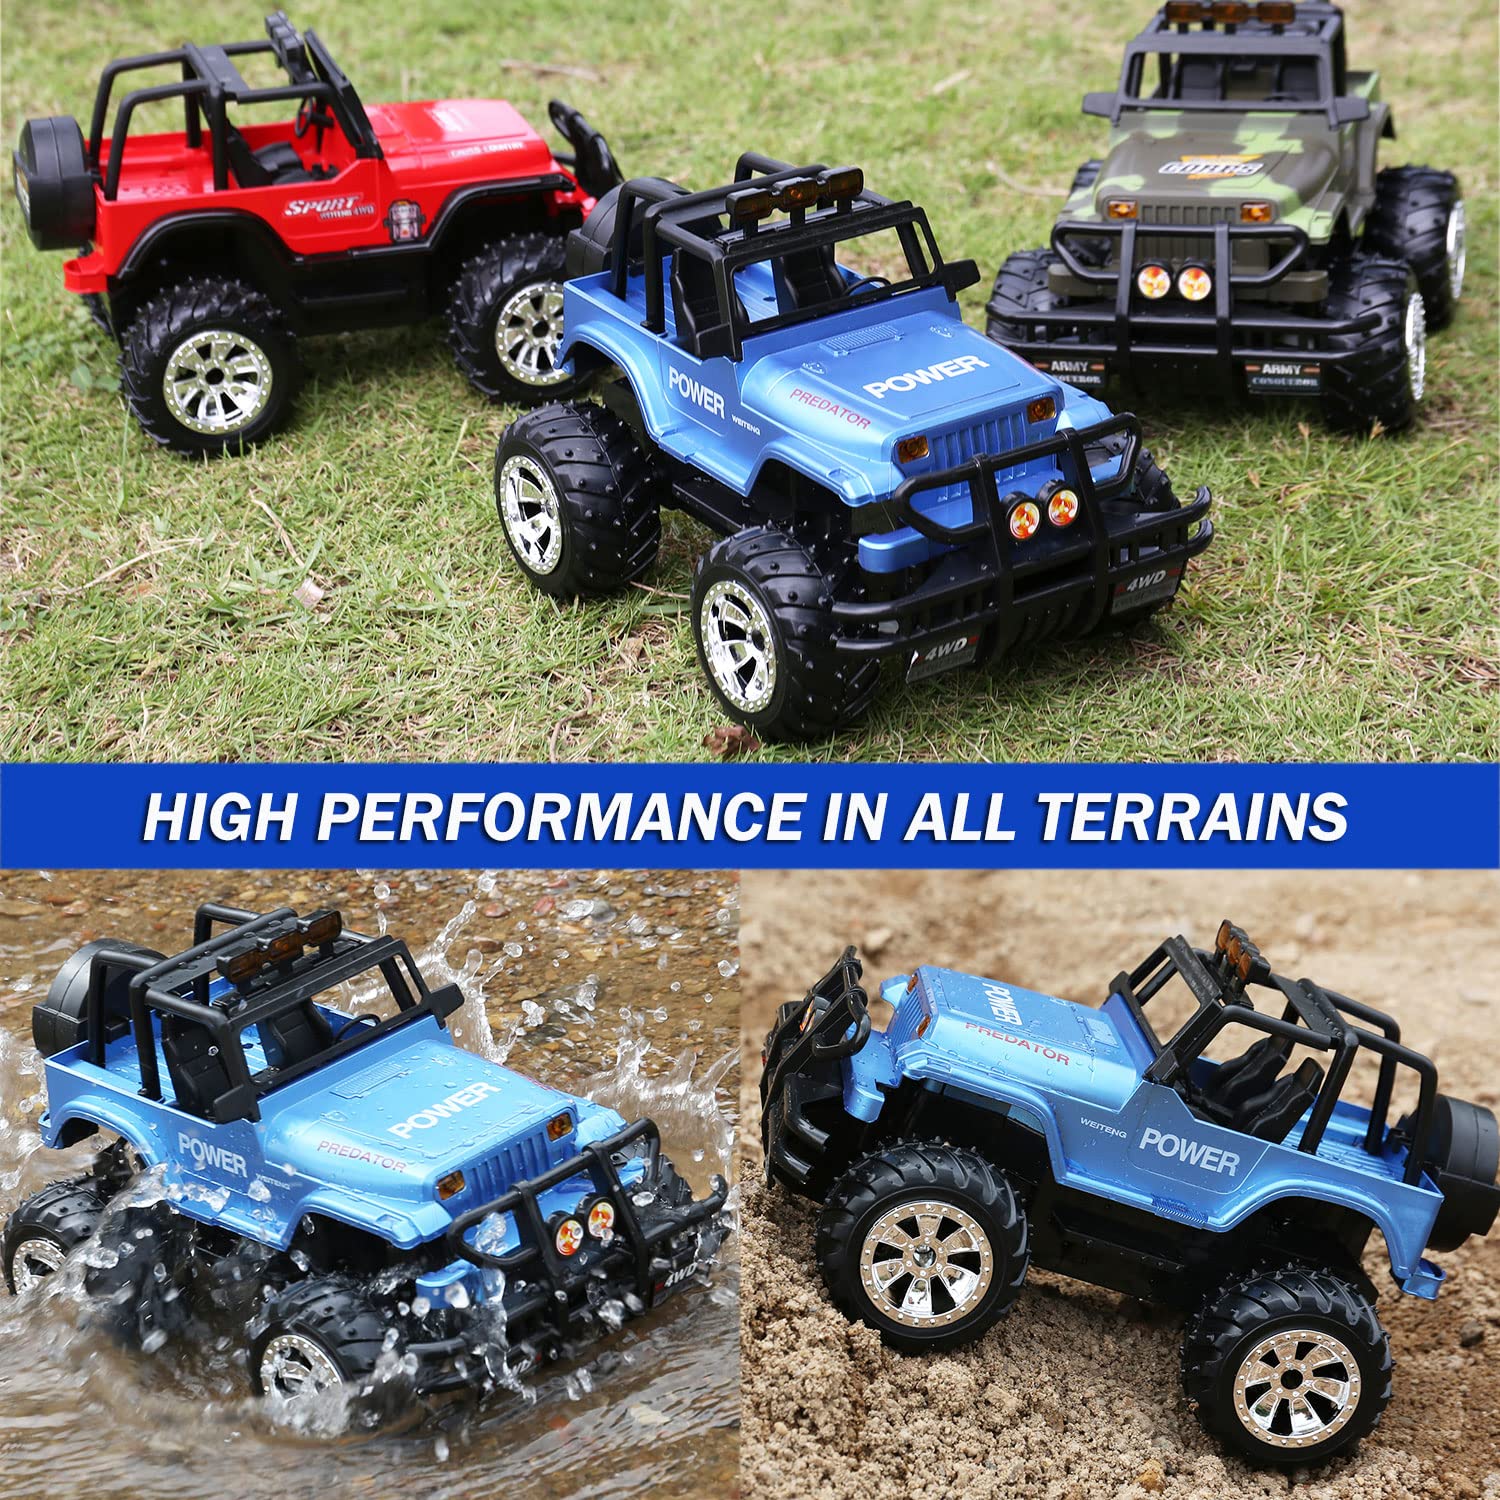 Remote Control Truck RC Car 1: 16 High Speed Fast Racing Rock Cralwer RC Cars 2.4Ghz Remote Control Car RC Monster Vehicle Truck Crawler Off Road for Boys Girls